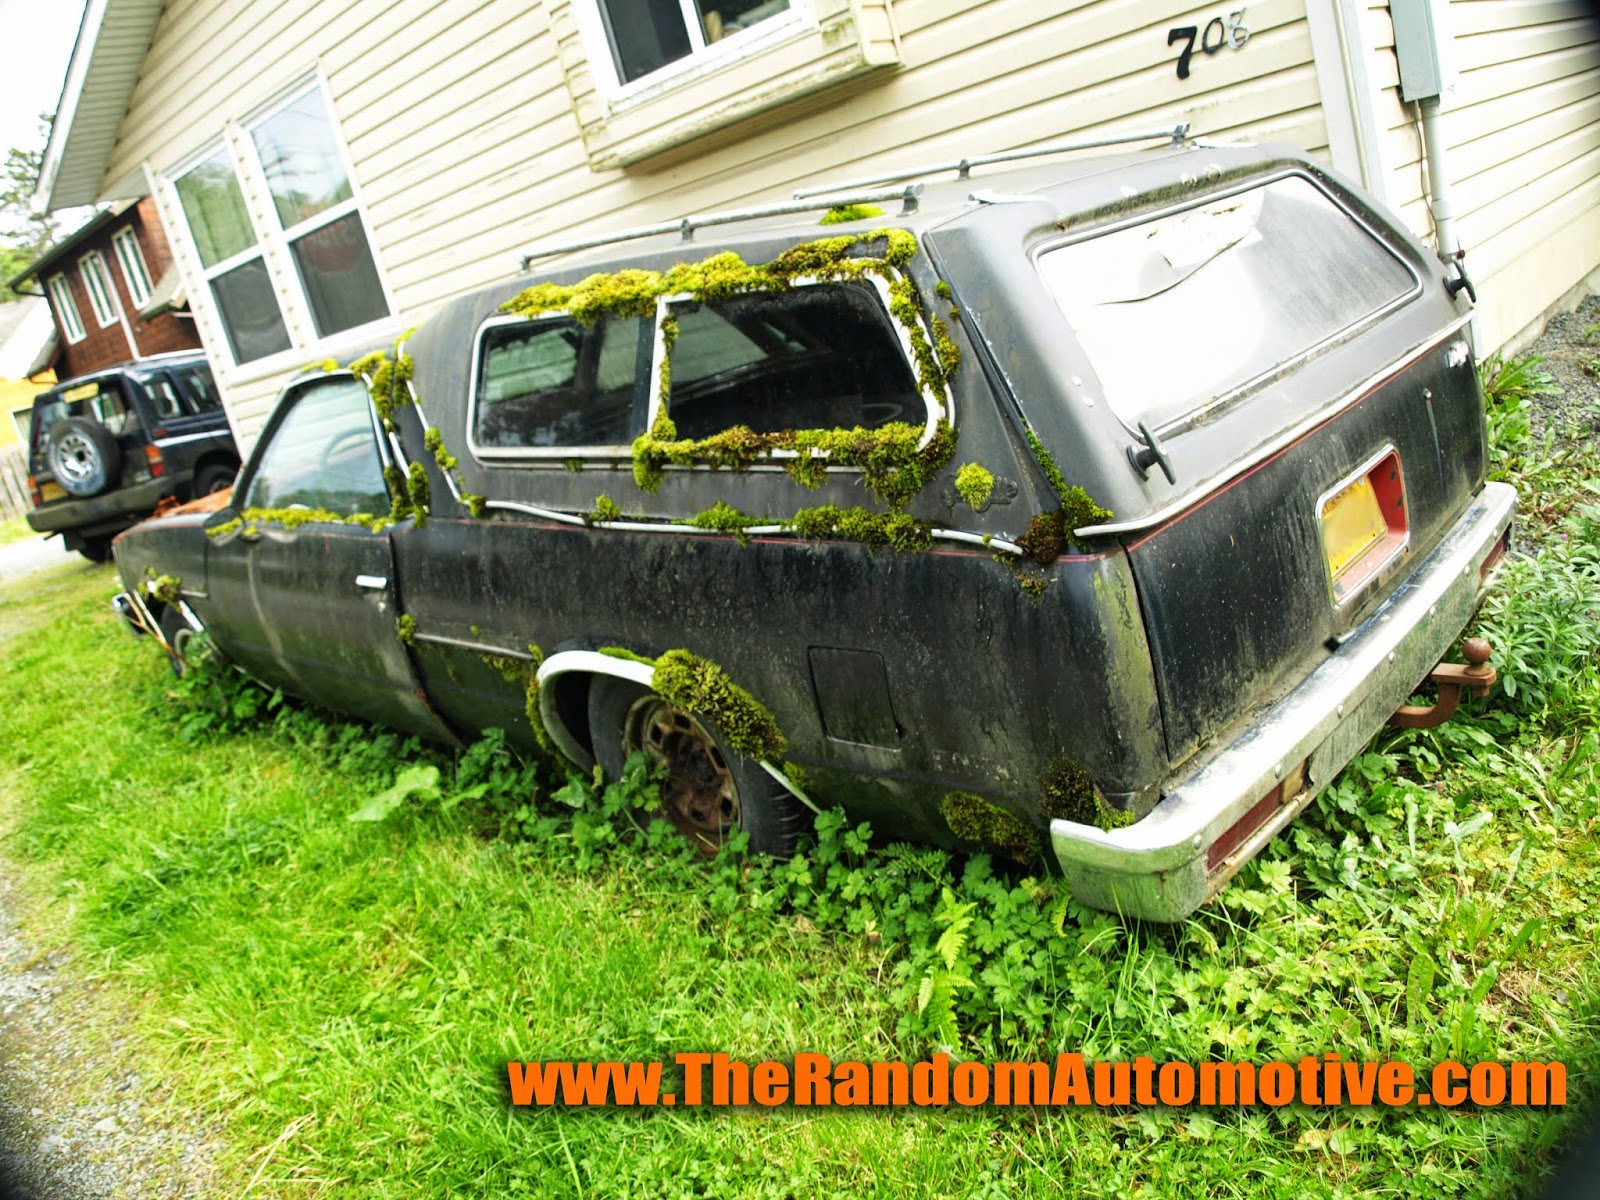 abandoned 1979 el camino chevy chevrolet sitka alaska rotting in style db productions dylan benson american muscle